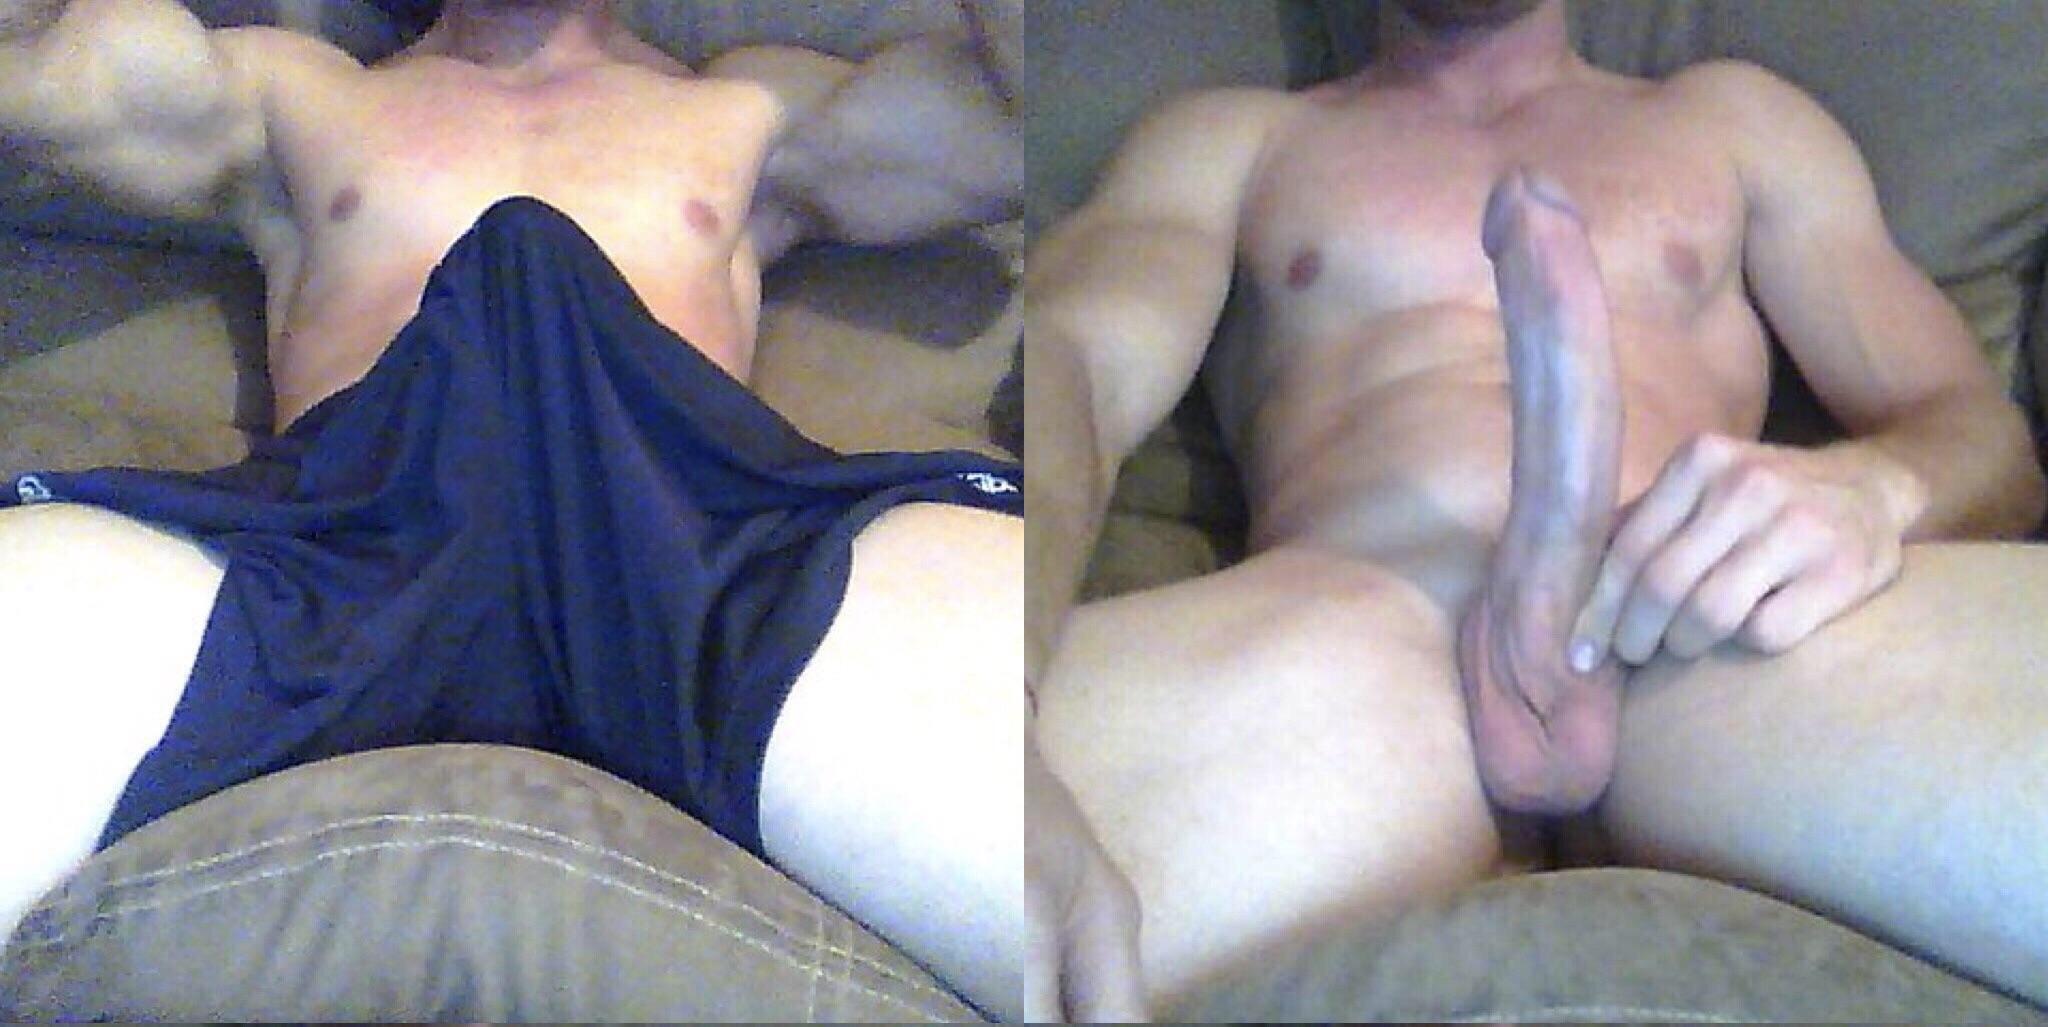 My first on/off and first bulge reveal.